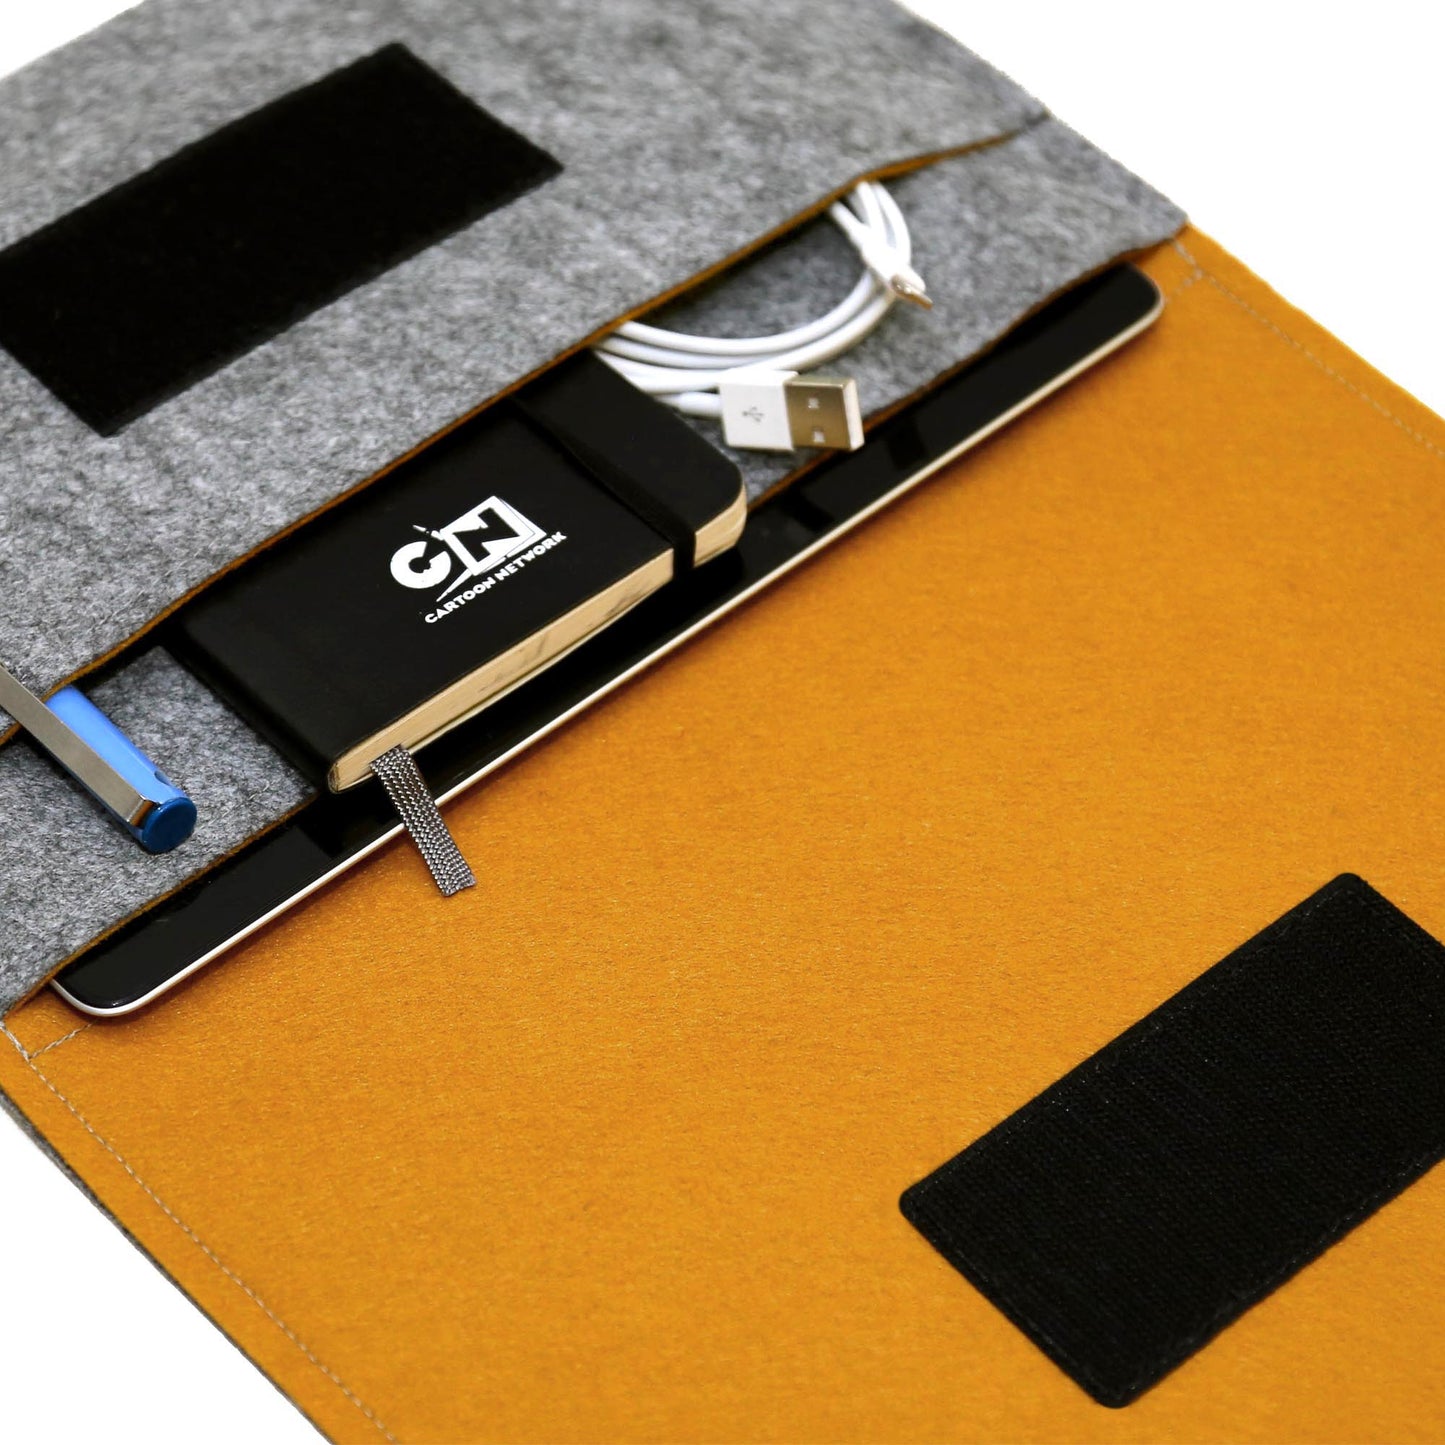 Premium Felt iPad Cover: Ultimate Protection with Accessories Pocket - Grey & Mustard